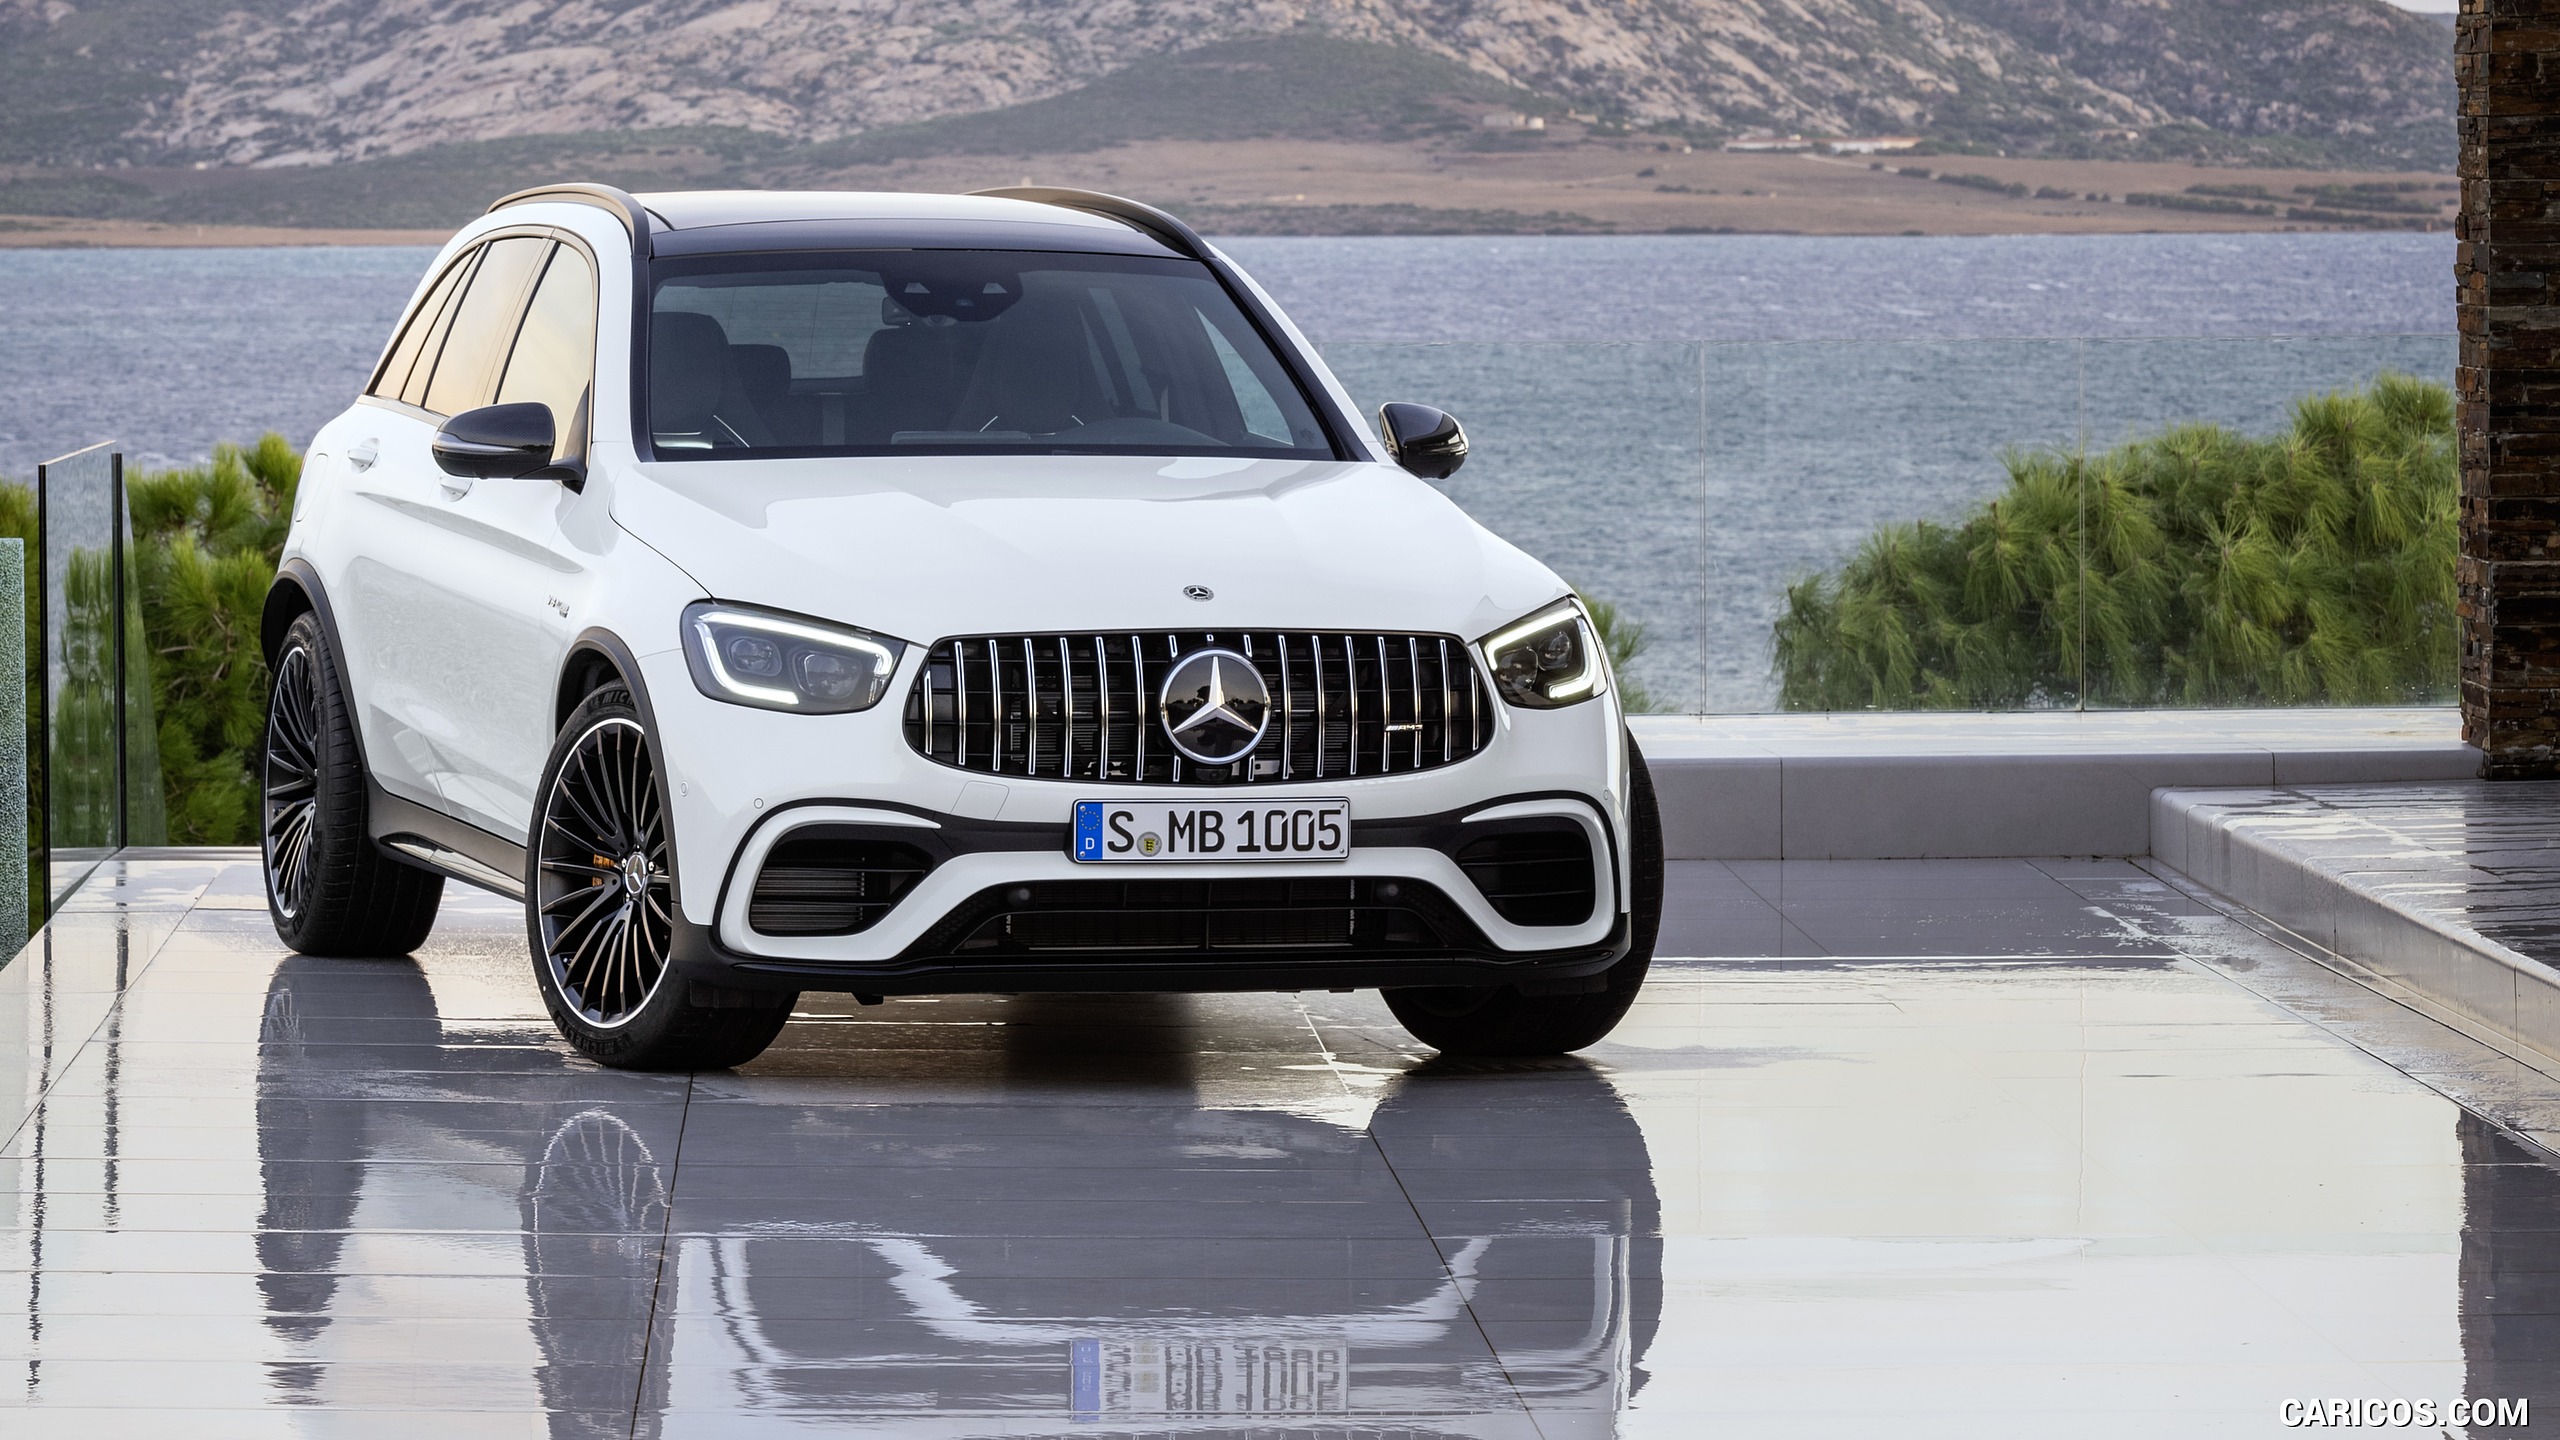 2020 Mercedes-AMG GLC 63 S 4MATIC+ - Front, #22 of 118